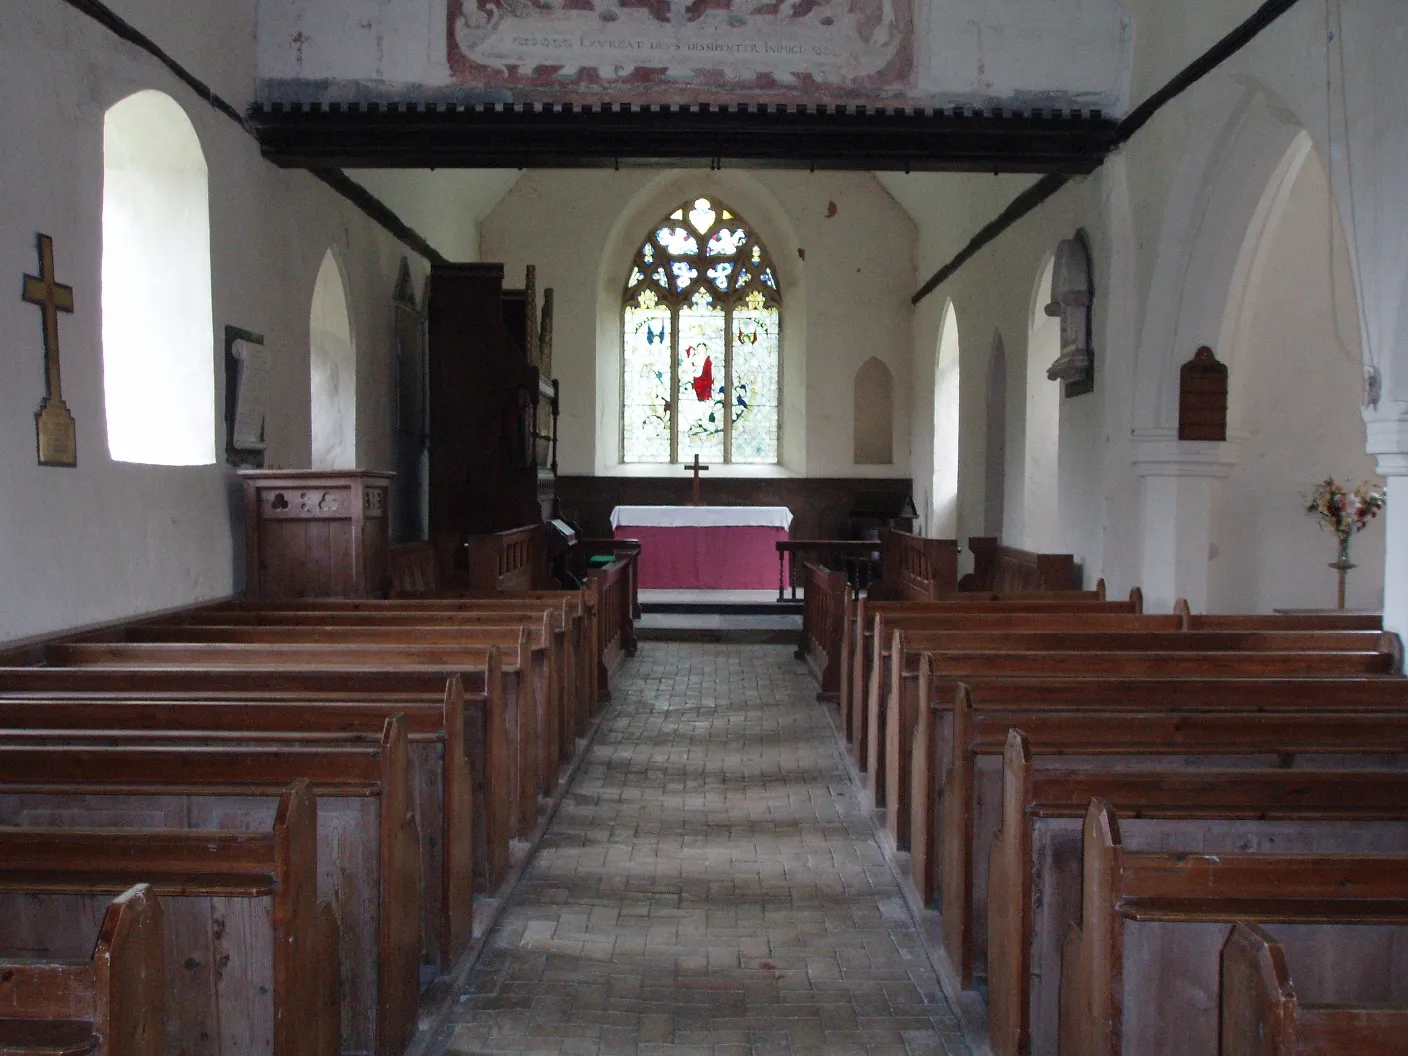 Photo showing: Inside St Mary's "Old Church" West Bergholt, Colchester, Essex, UK